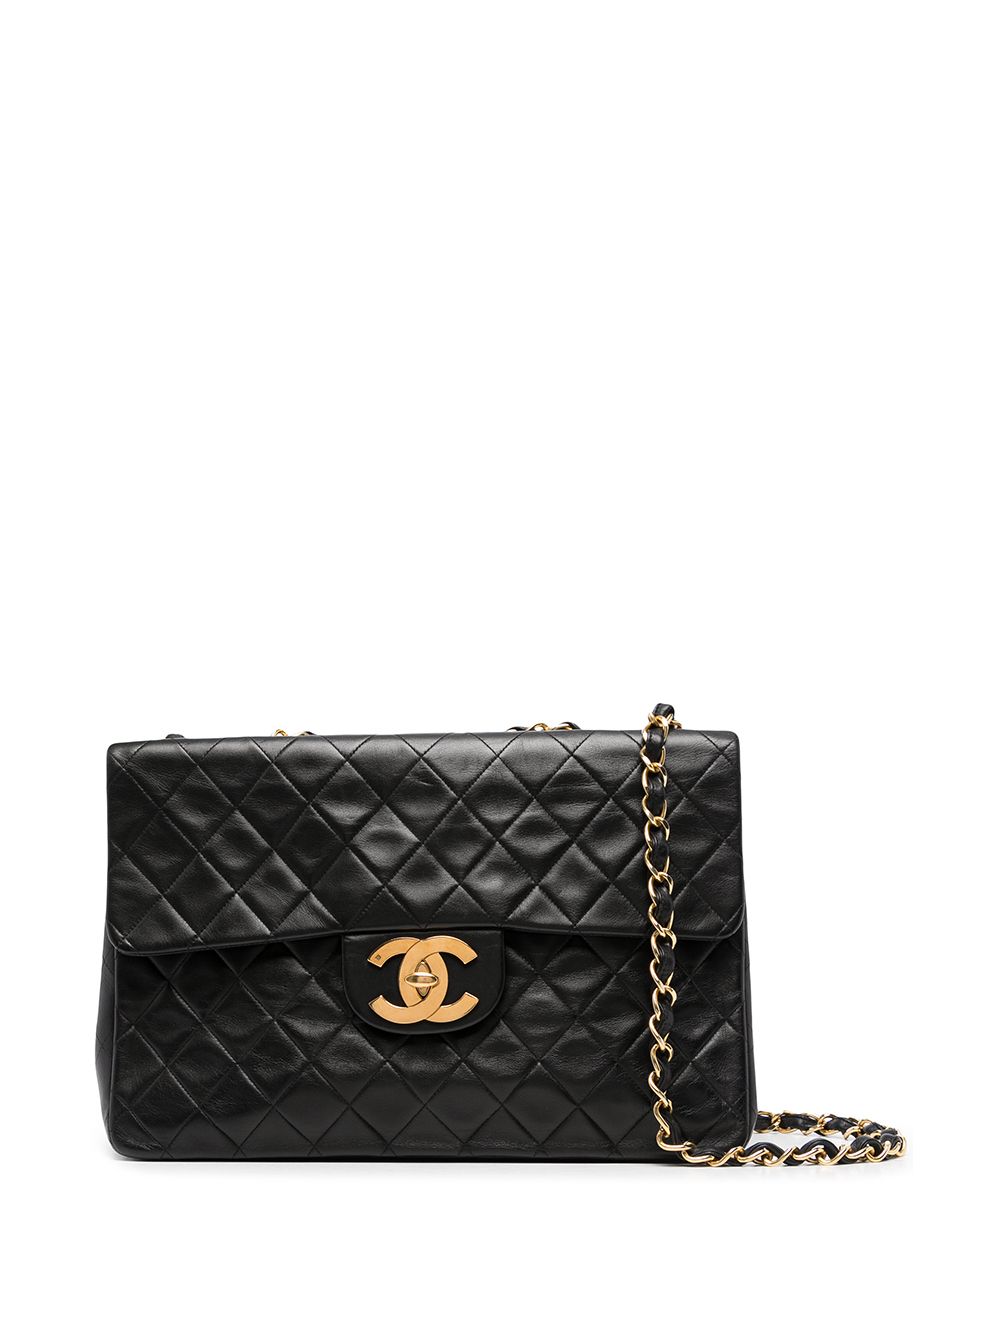 CHANEL Pre-Owned 1994-1996 Diamond-Quilted Flap Backpack - Black for Women